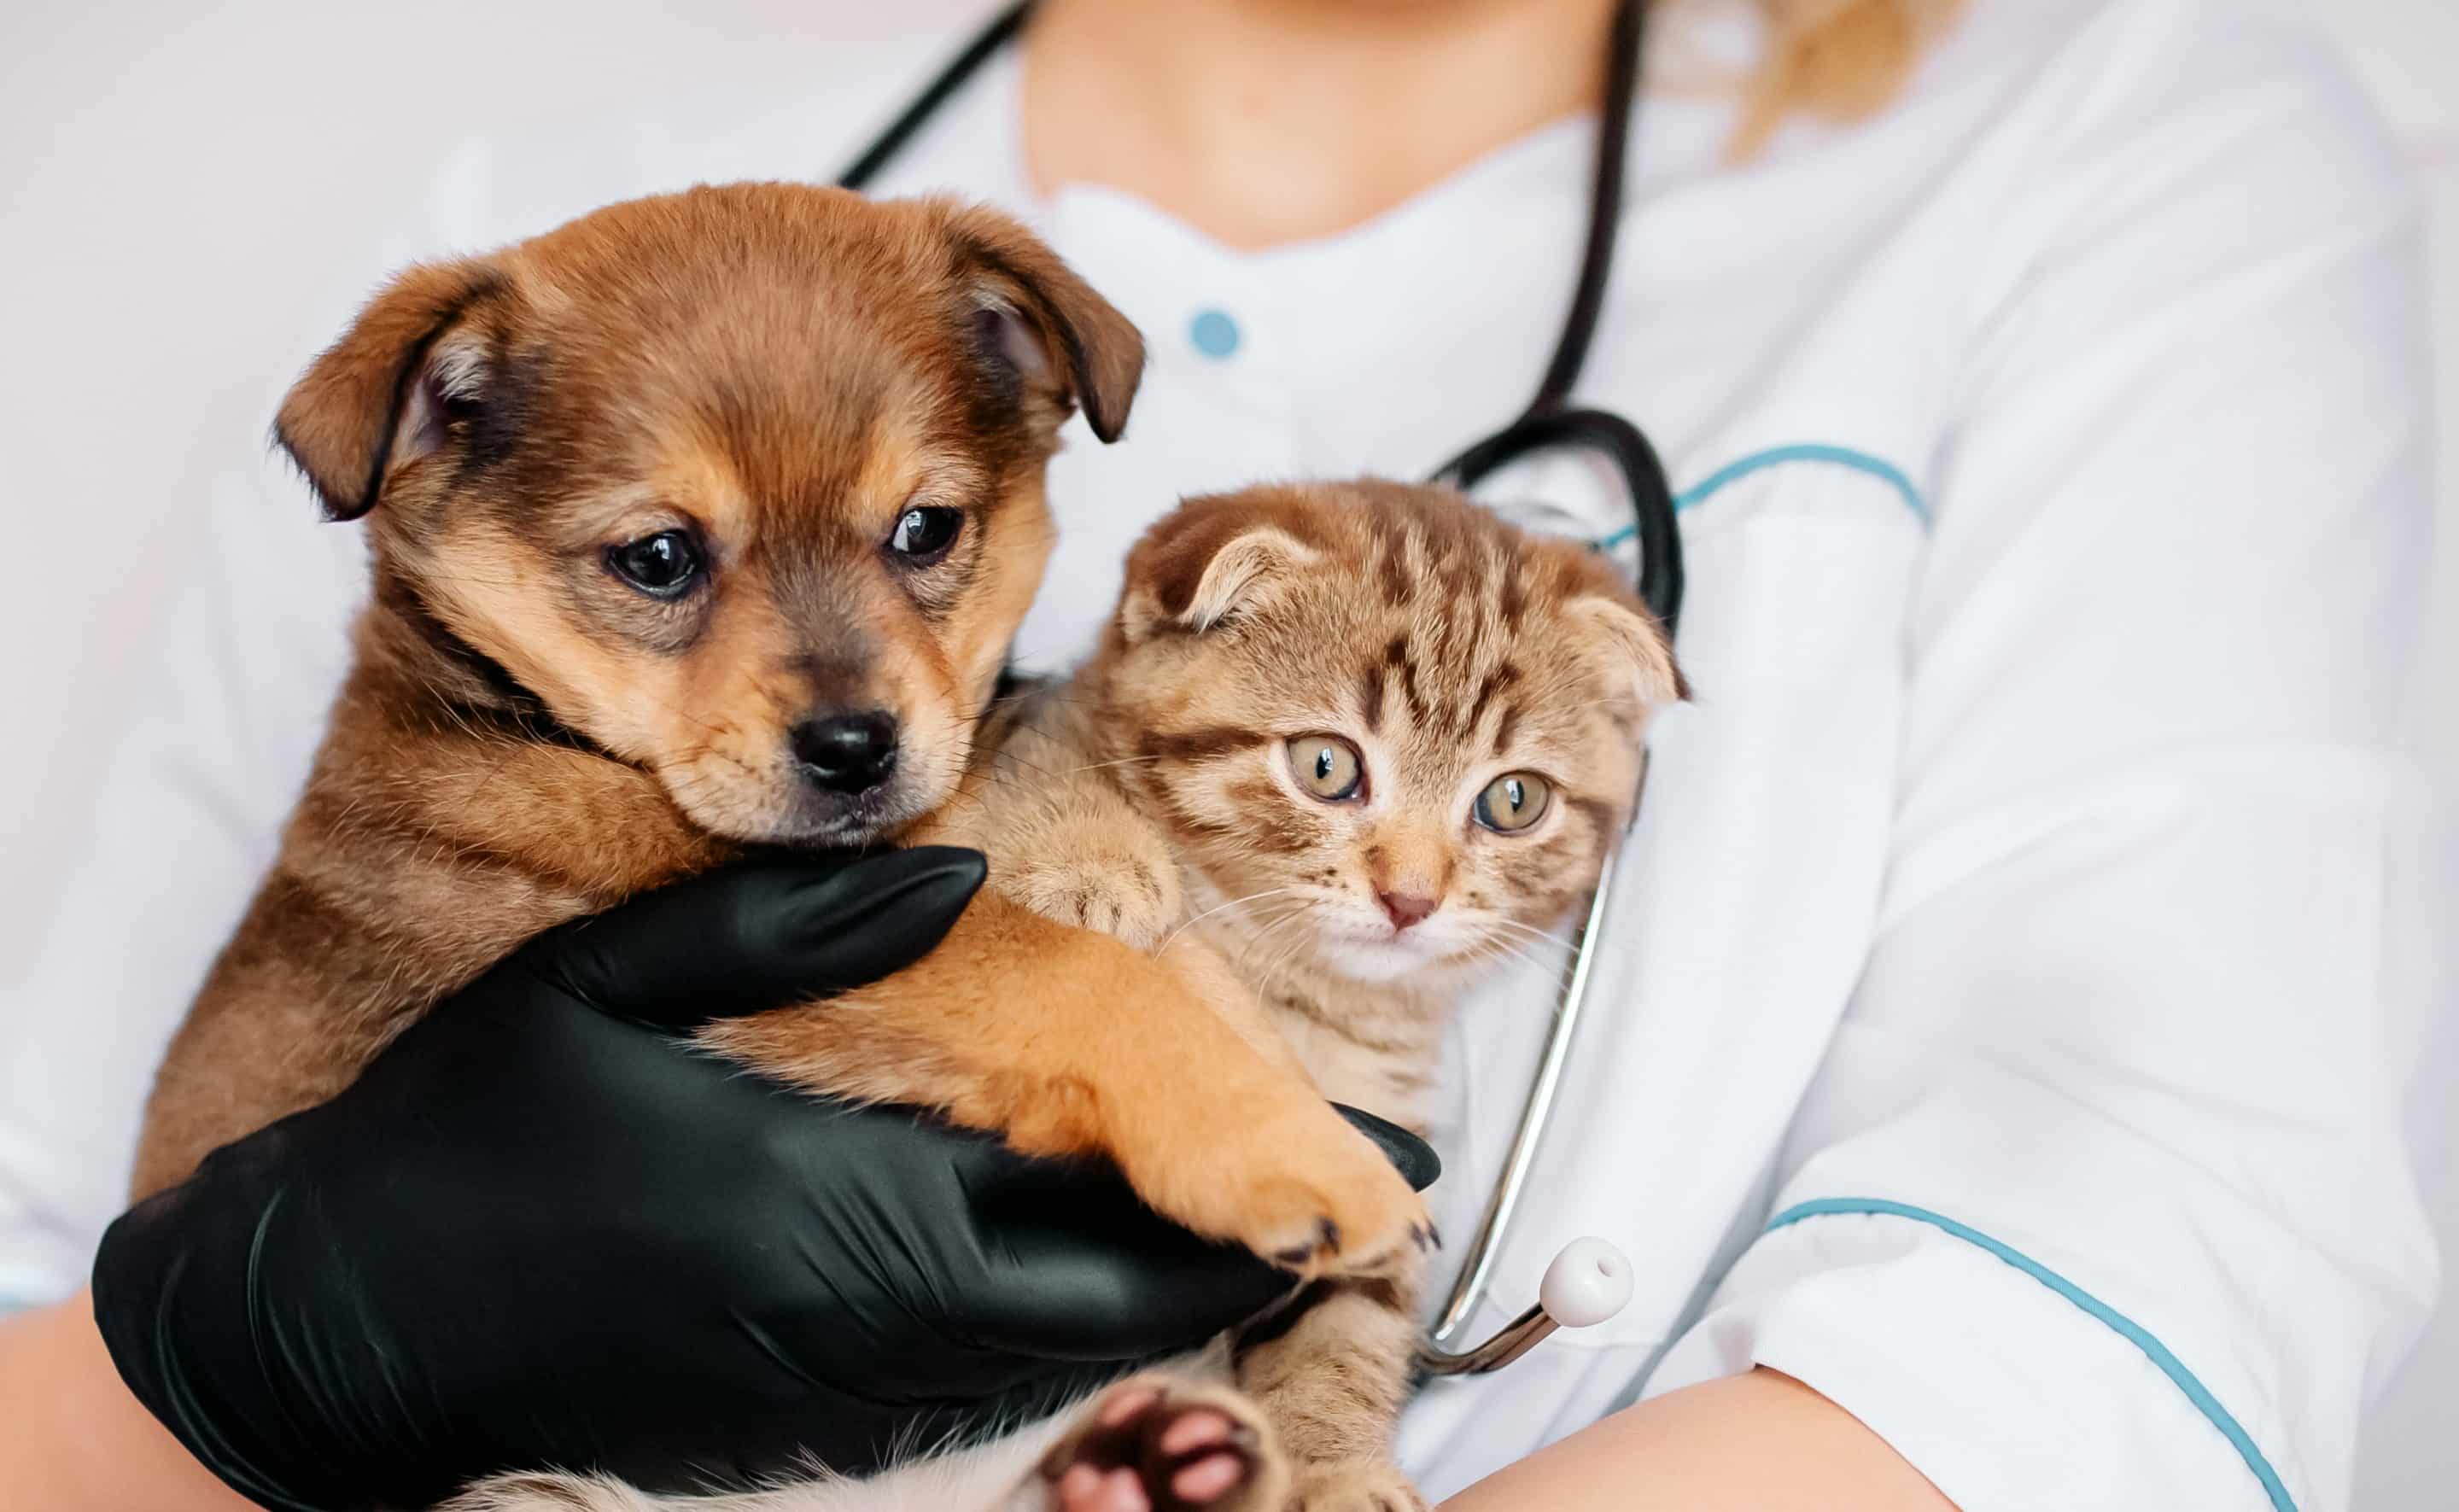 pet microchipping available at Bluegrass Veterinary Hospital in<br />
Gallatin, TN